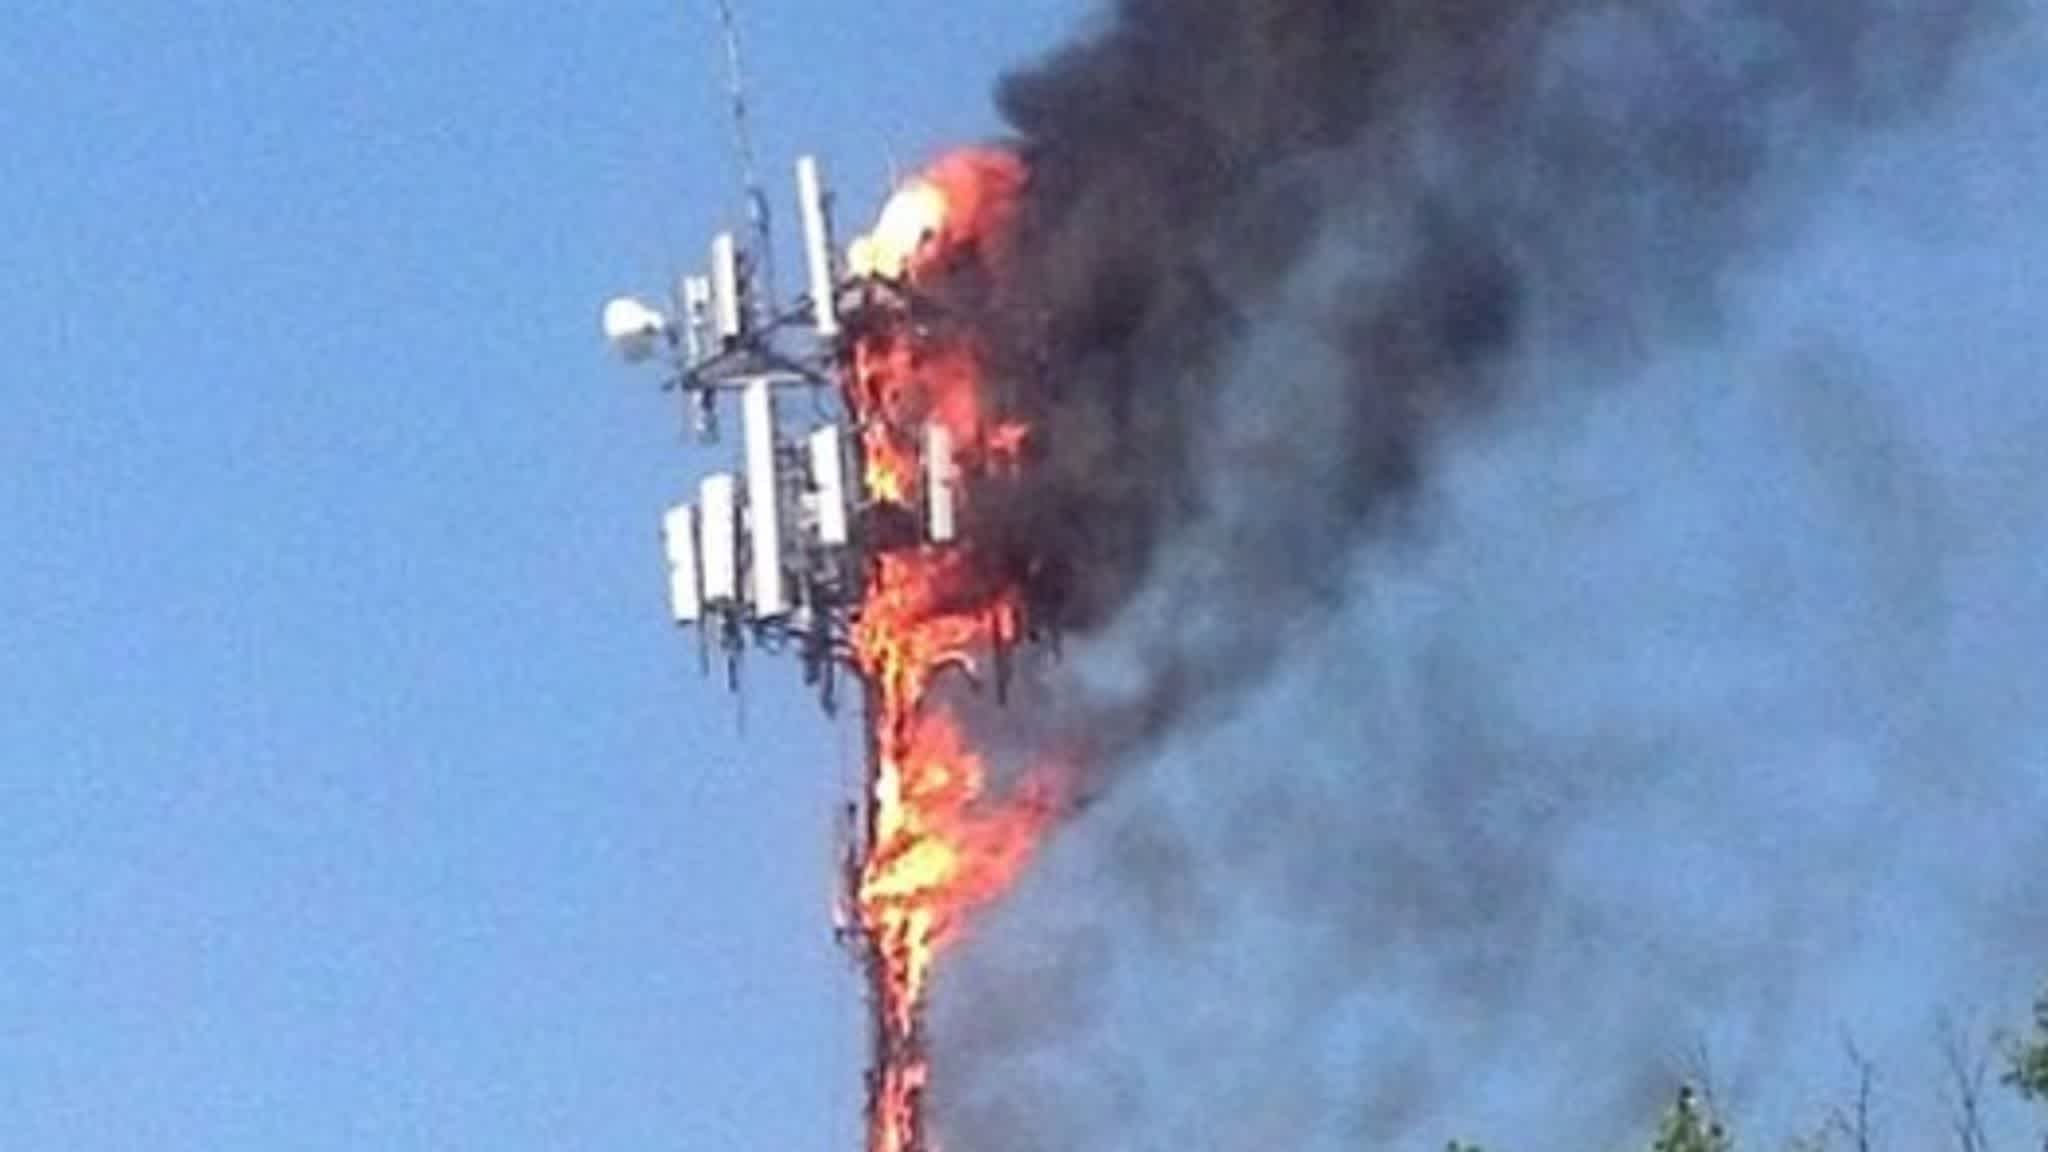 During the COVID pandemic, signal masts installed as part of the 5G wireless rollout became a target of fancy by some on the internet. Fortunately, unlike envelopes, text messages do not burn up in fire.